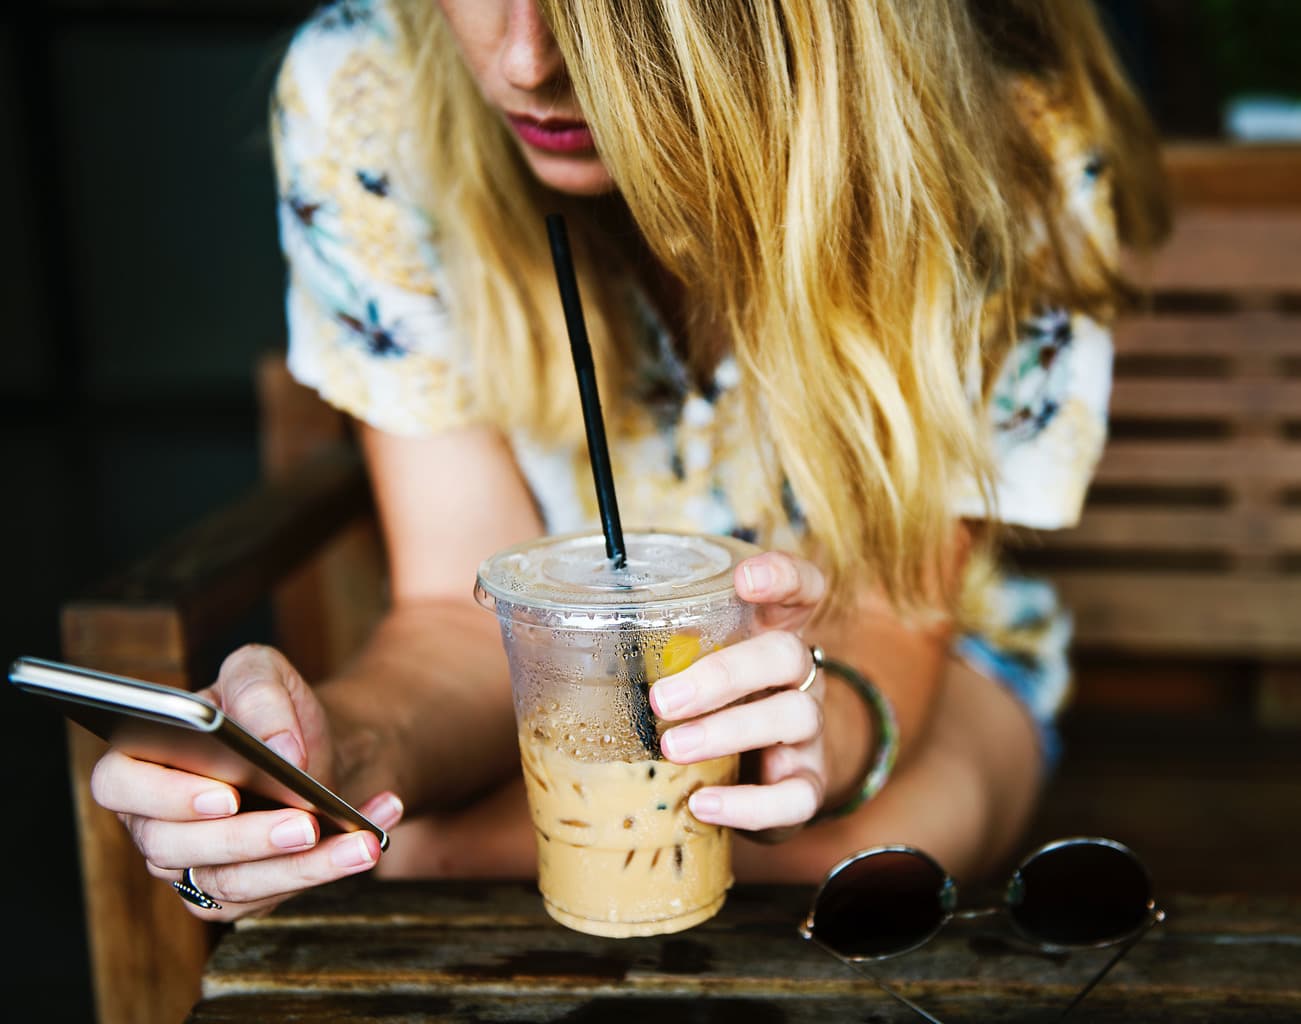 Girl using social media on her phone while holding a coffee